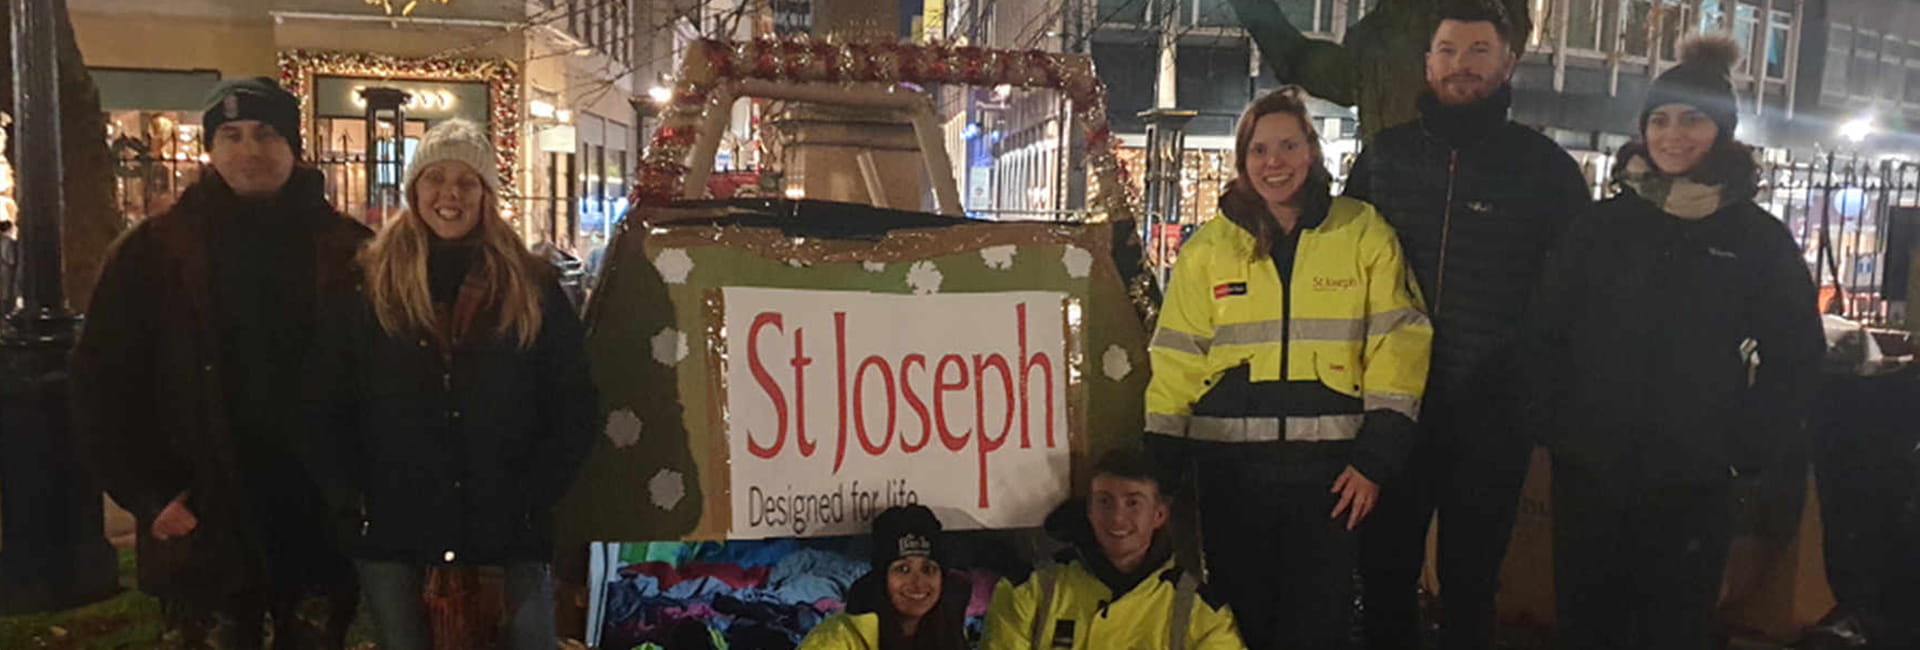 News and Events, St Joseph Chilly Challenge, Header